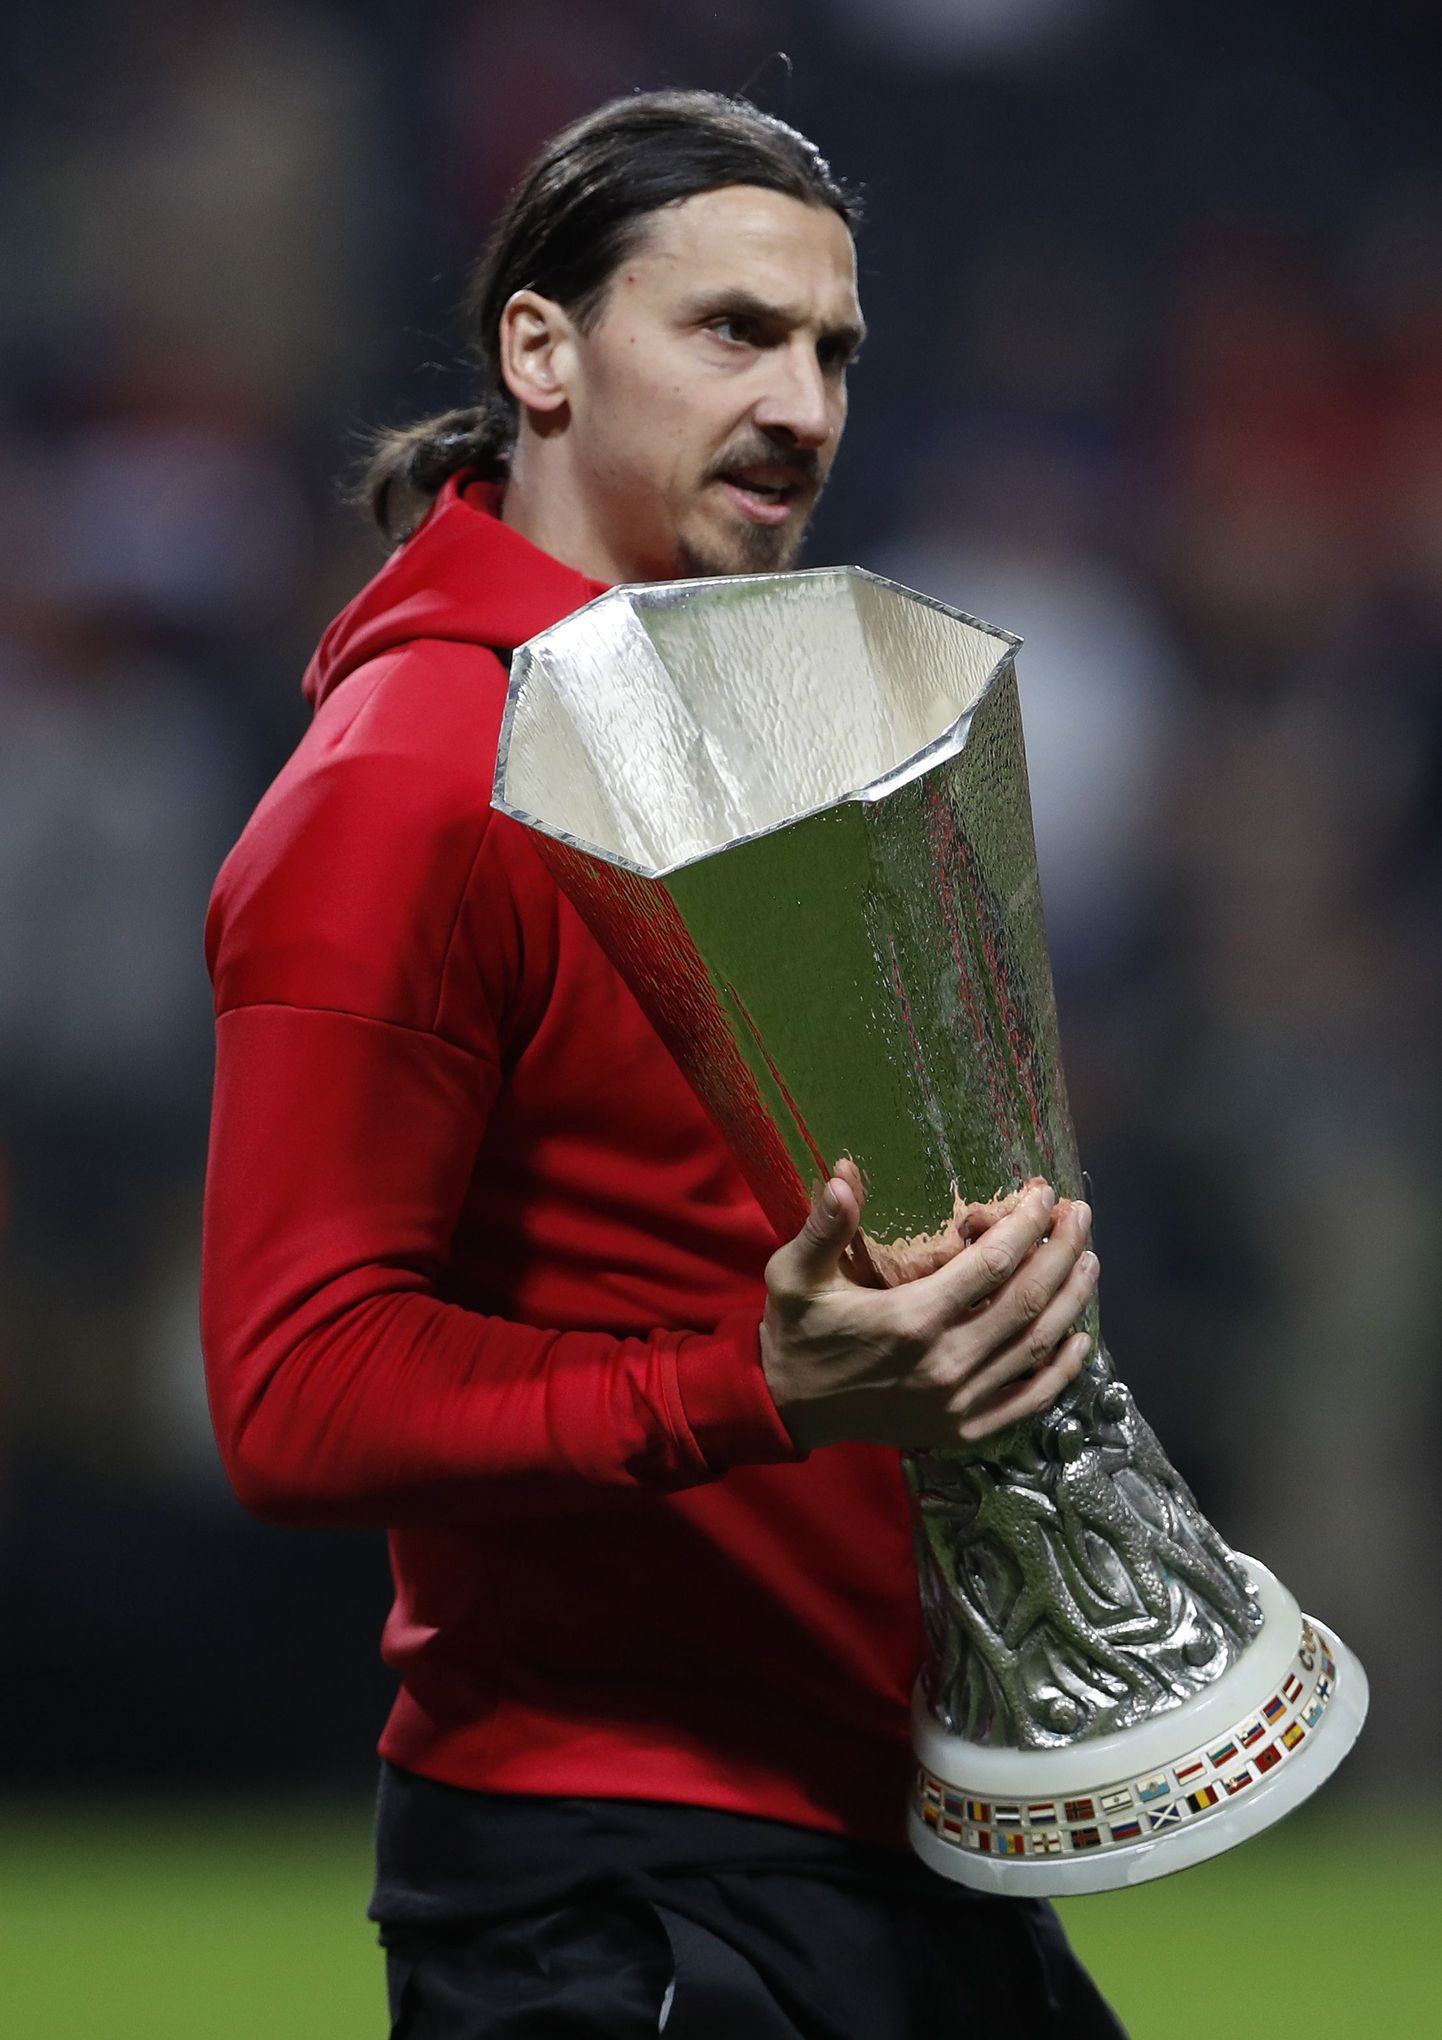 Football Soccer - Ajax Amsterdam v Manchester United - UEFA Europa League Final - Friends Arena, Solna, Stockholm, Sweden - 24/5/17 Manchester United's Zlatan Ibrahimovic celebrates with the trophy after winning the Europa League Reuters / Lee Smith Livepic